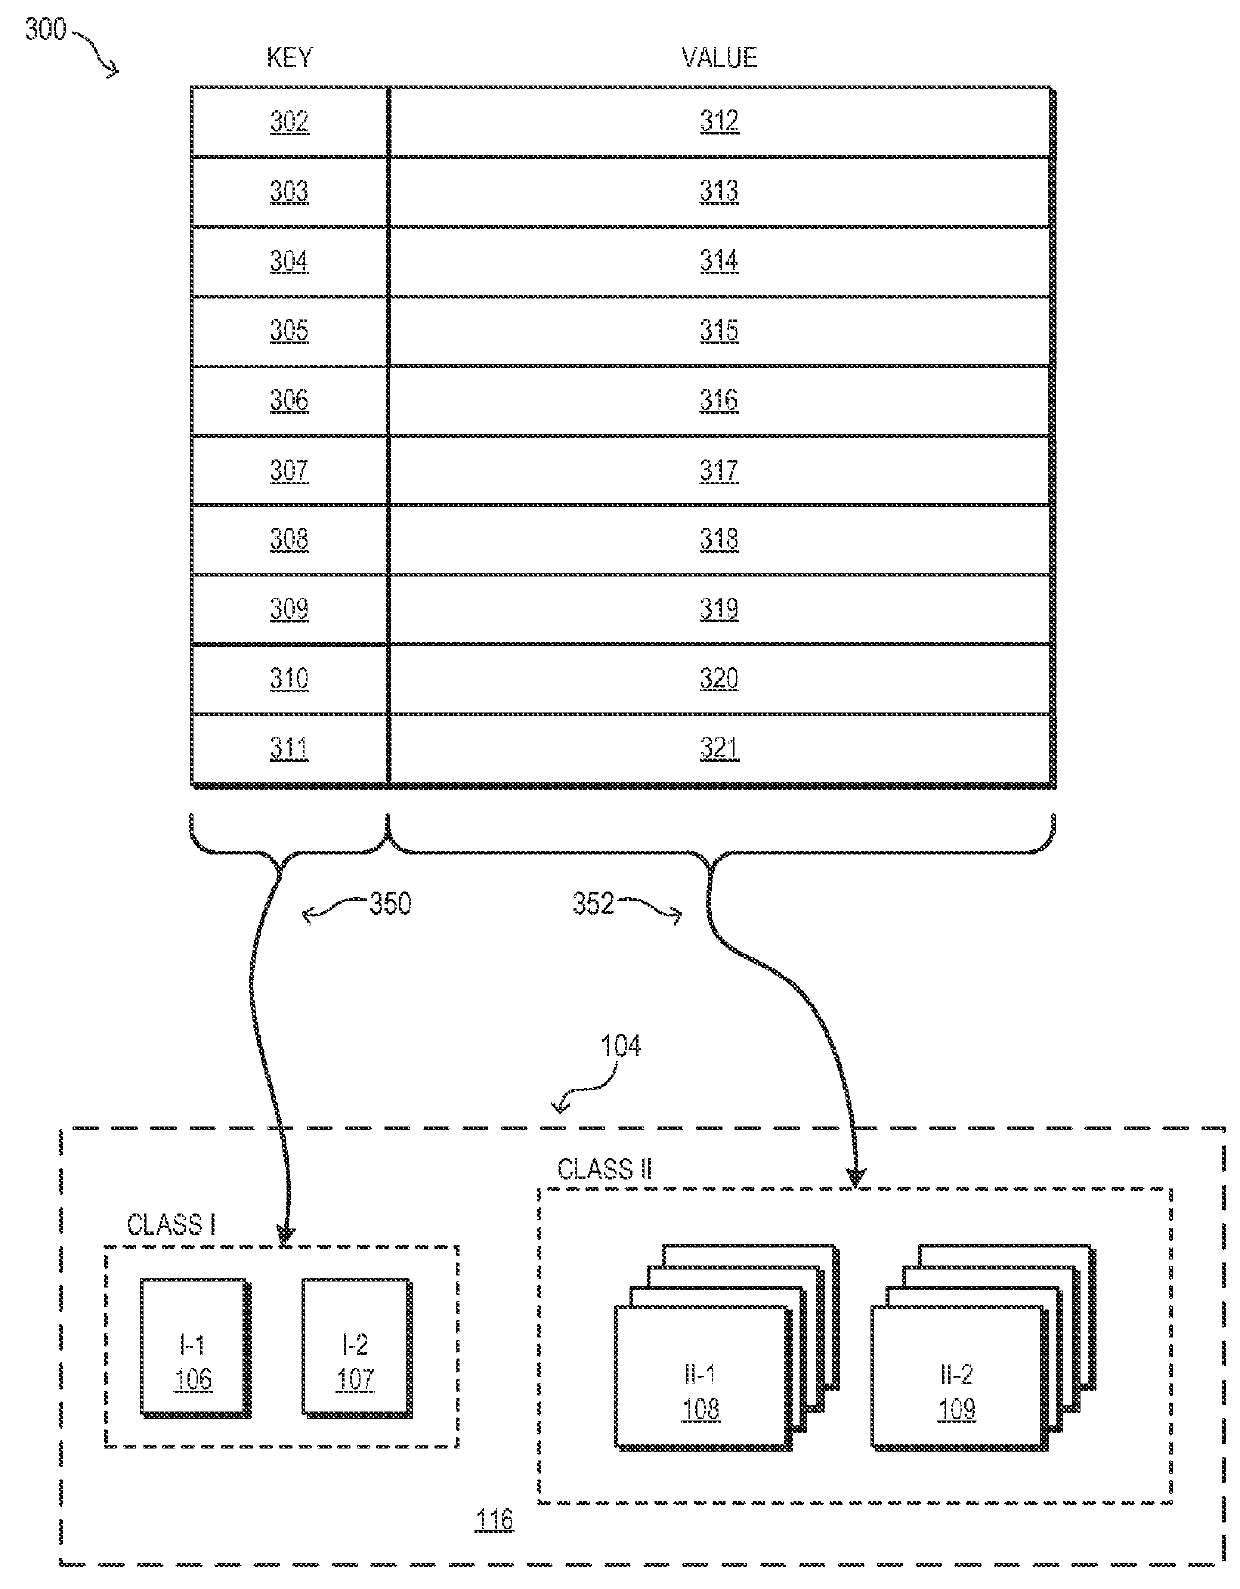 System and method for memory allocation in a multiclass memory system